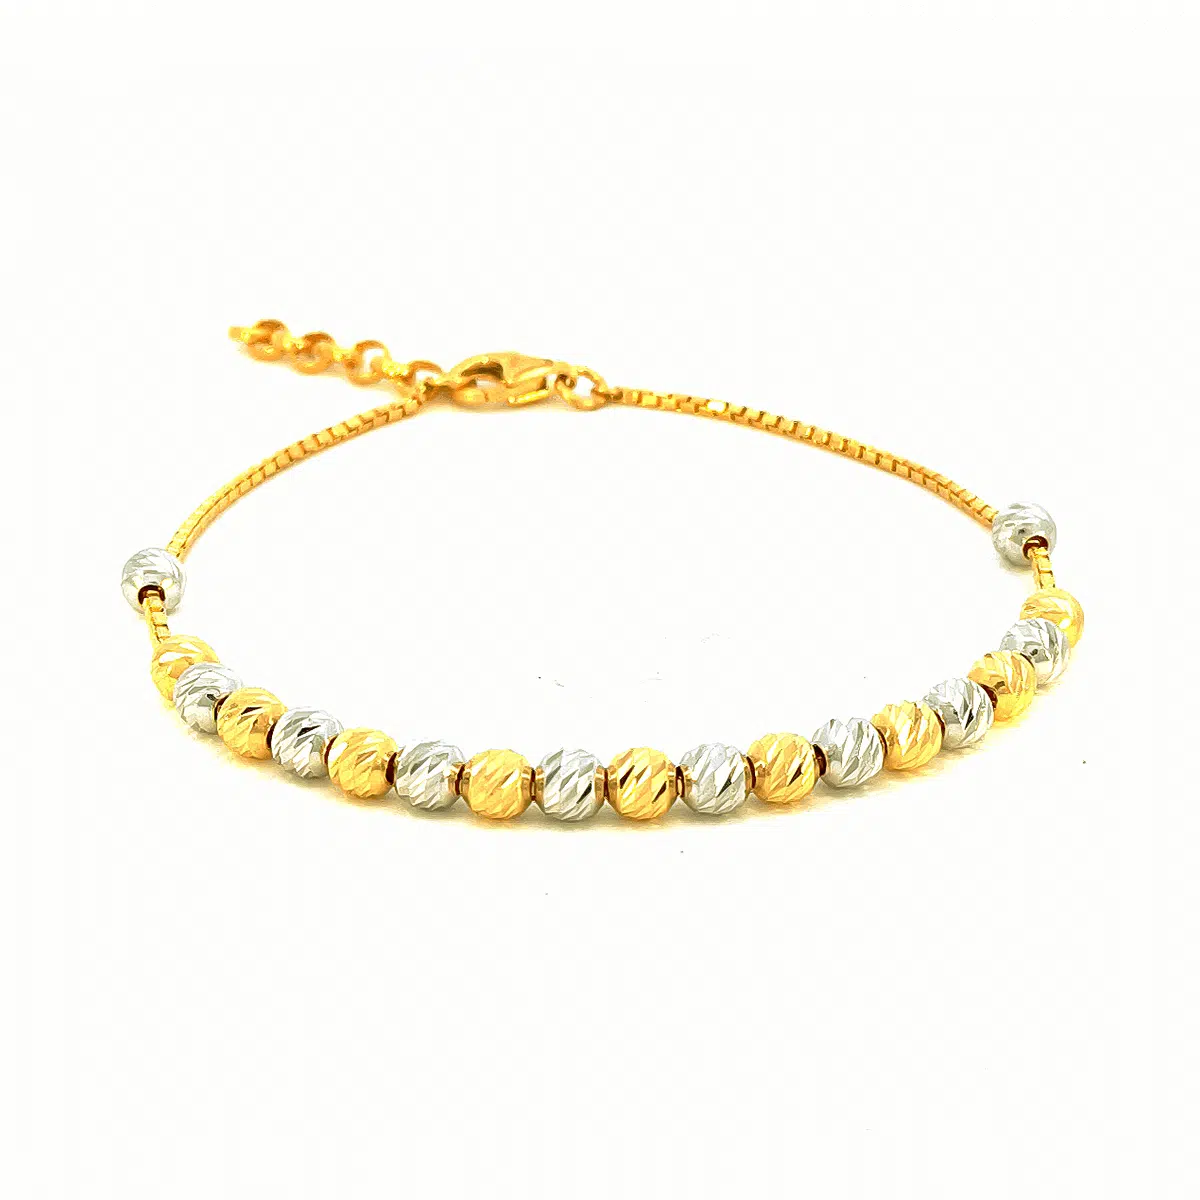 SK BRACELET FOR WOMEN TALIA threaded with duotone faceted-cut beads and is a minimalistic piece